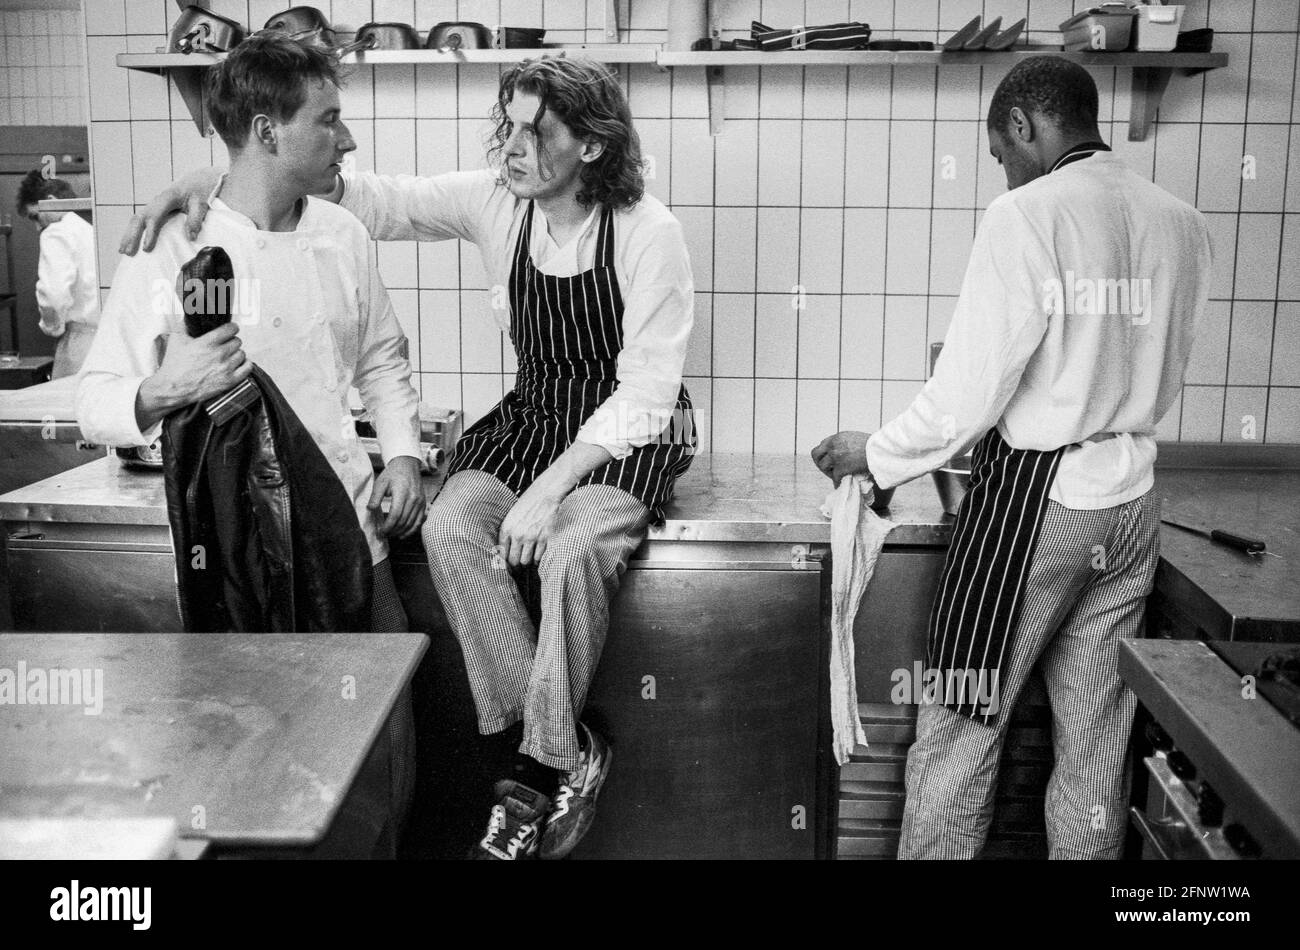 Celebrity chef Marco Pierre White in the kitchen of Harvey's restaurant in Wandsworth at the height of his growing fame. London - 1989. UK Stock Photo